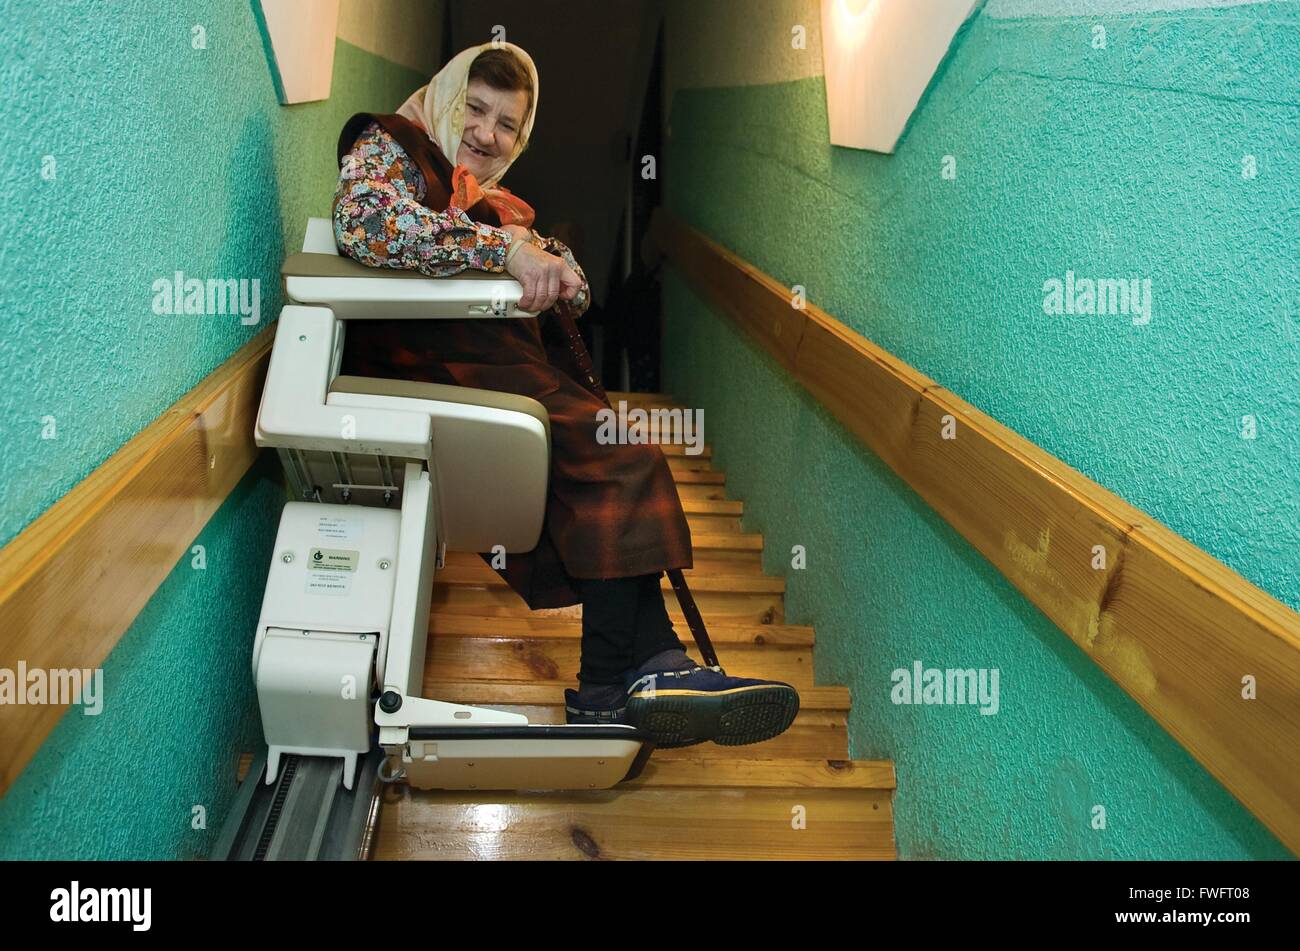 Chervona, Ukraine. An elderly woman sits smiling on a stair lift in the Home of Charity, a care home for elderly people supported by International Aid Trust, Much Hoole, Preston, Lancashire, UK Stock Photo